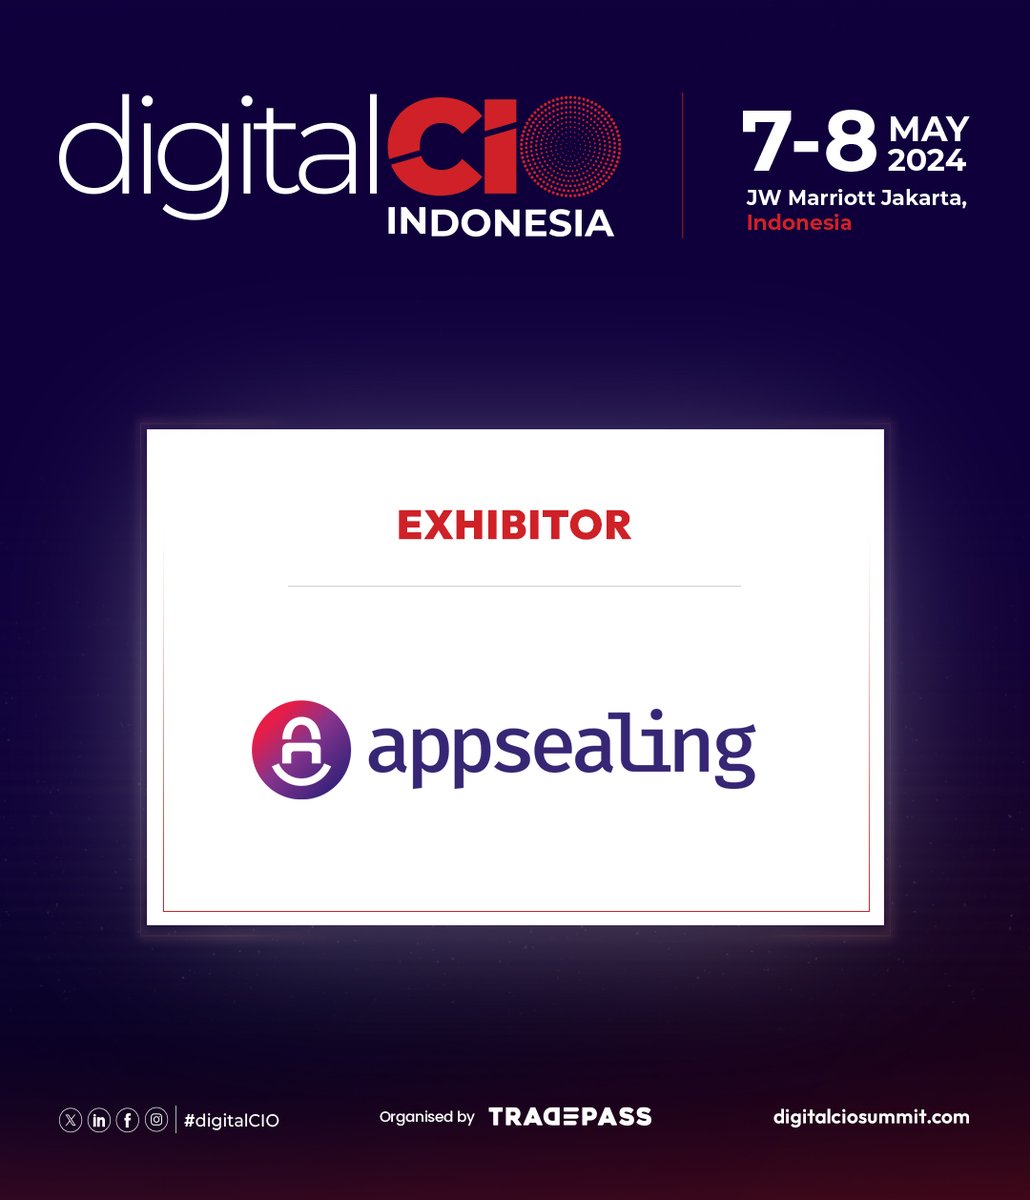 We are delighted to welcome AppSealing to digitalCIO 2024 - Indonesia! Register now to network with their team of experts, who will be showcasing their solutions at the platform: hubs.la/Q02t7s760

#digitalCIO #CIO #ITleaders #tradepass #data #AI #greentech #digitalcioevent